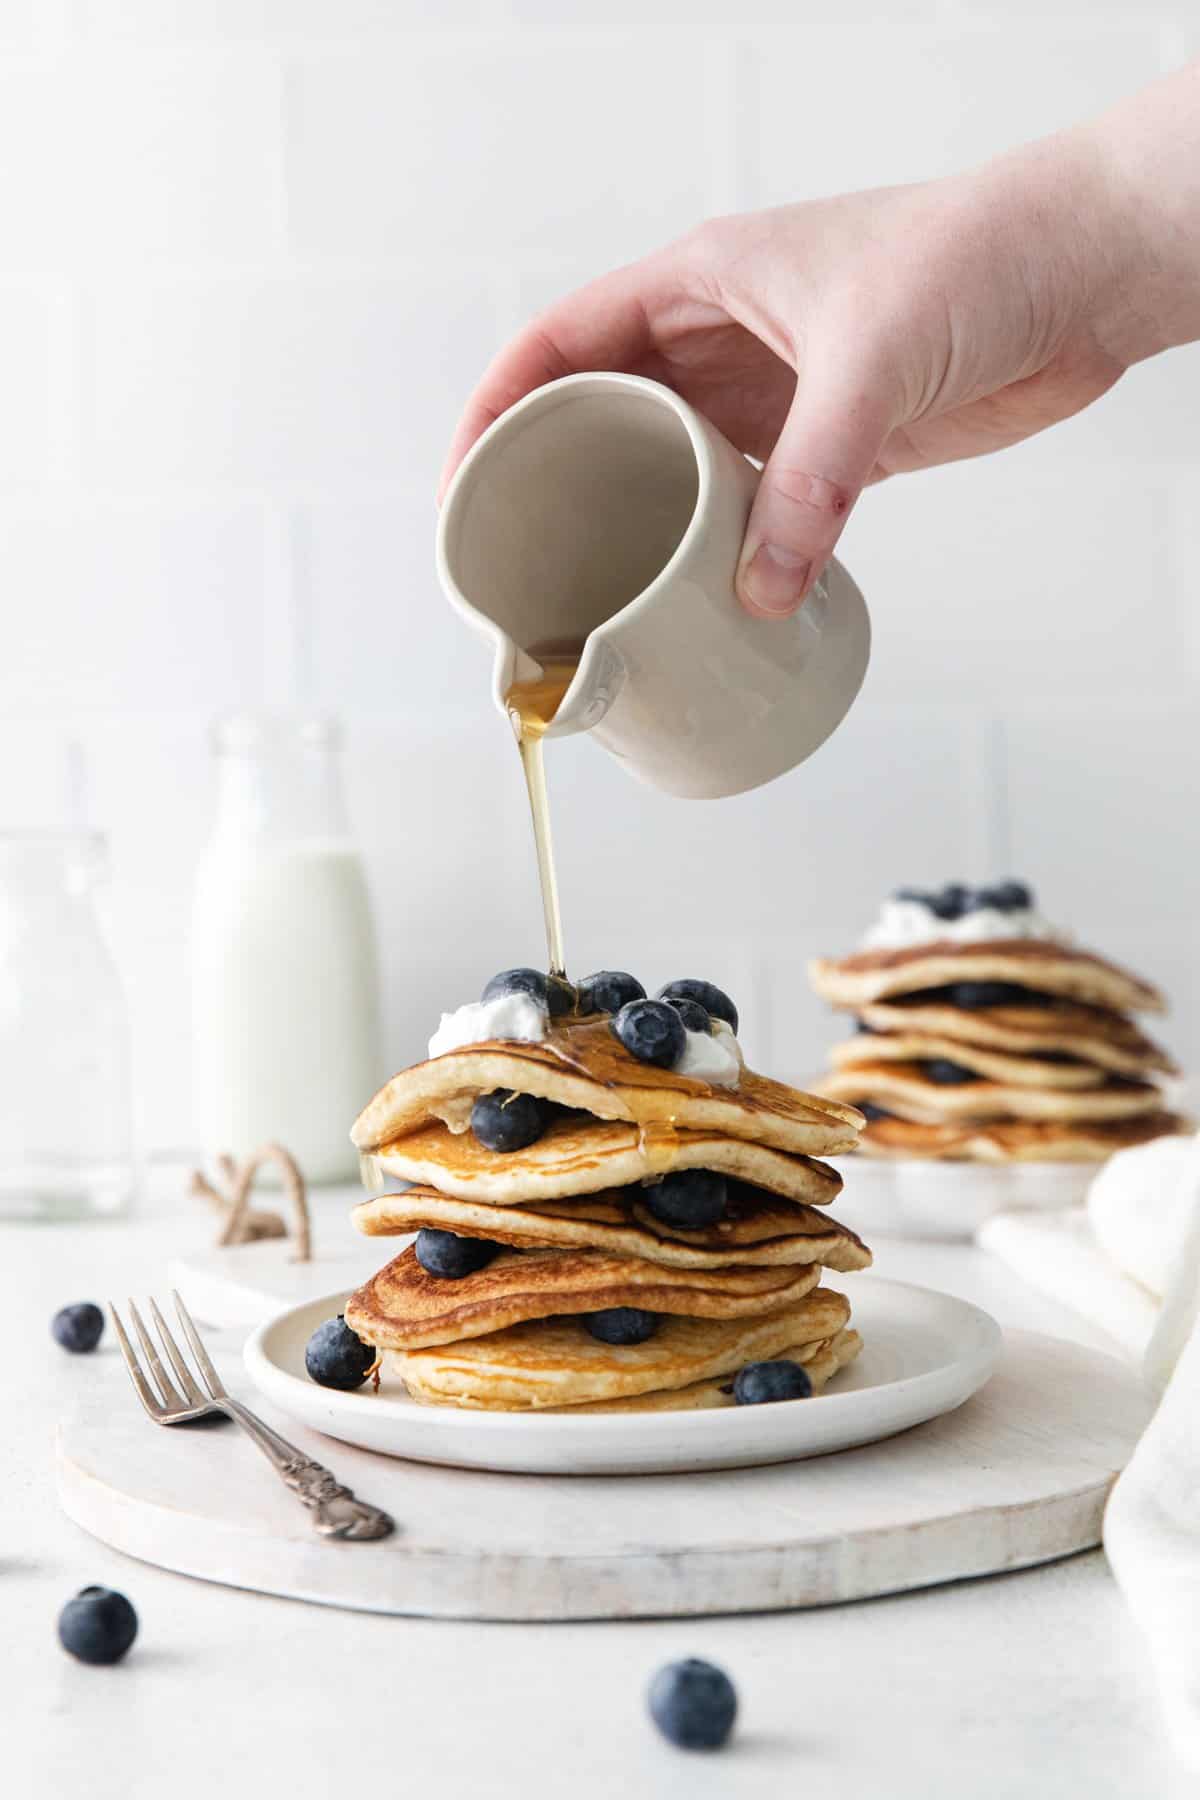 hand pouring maple syrup from a white container onto a stack of blueberry pancakes on a white plate